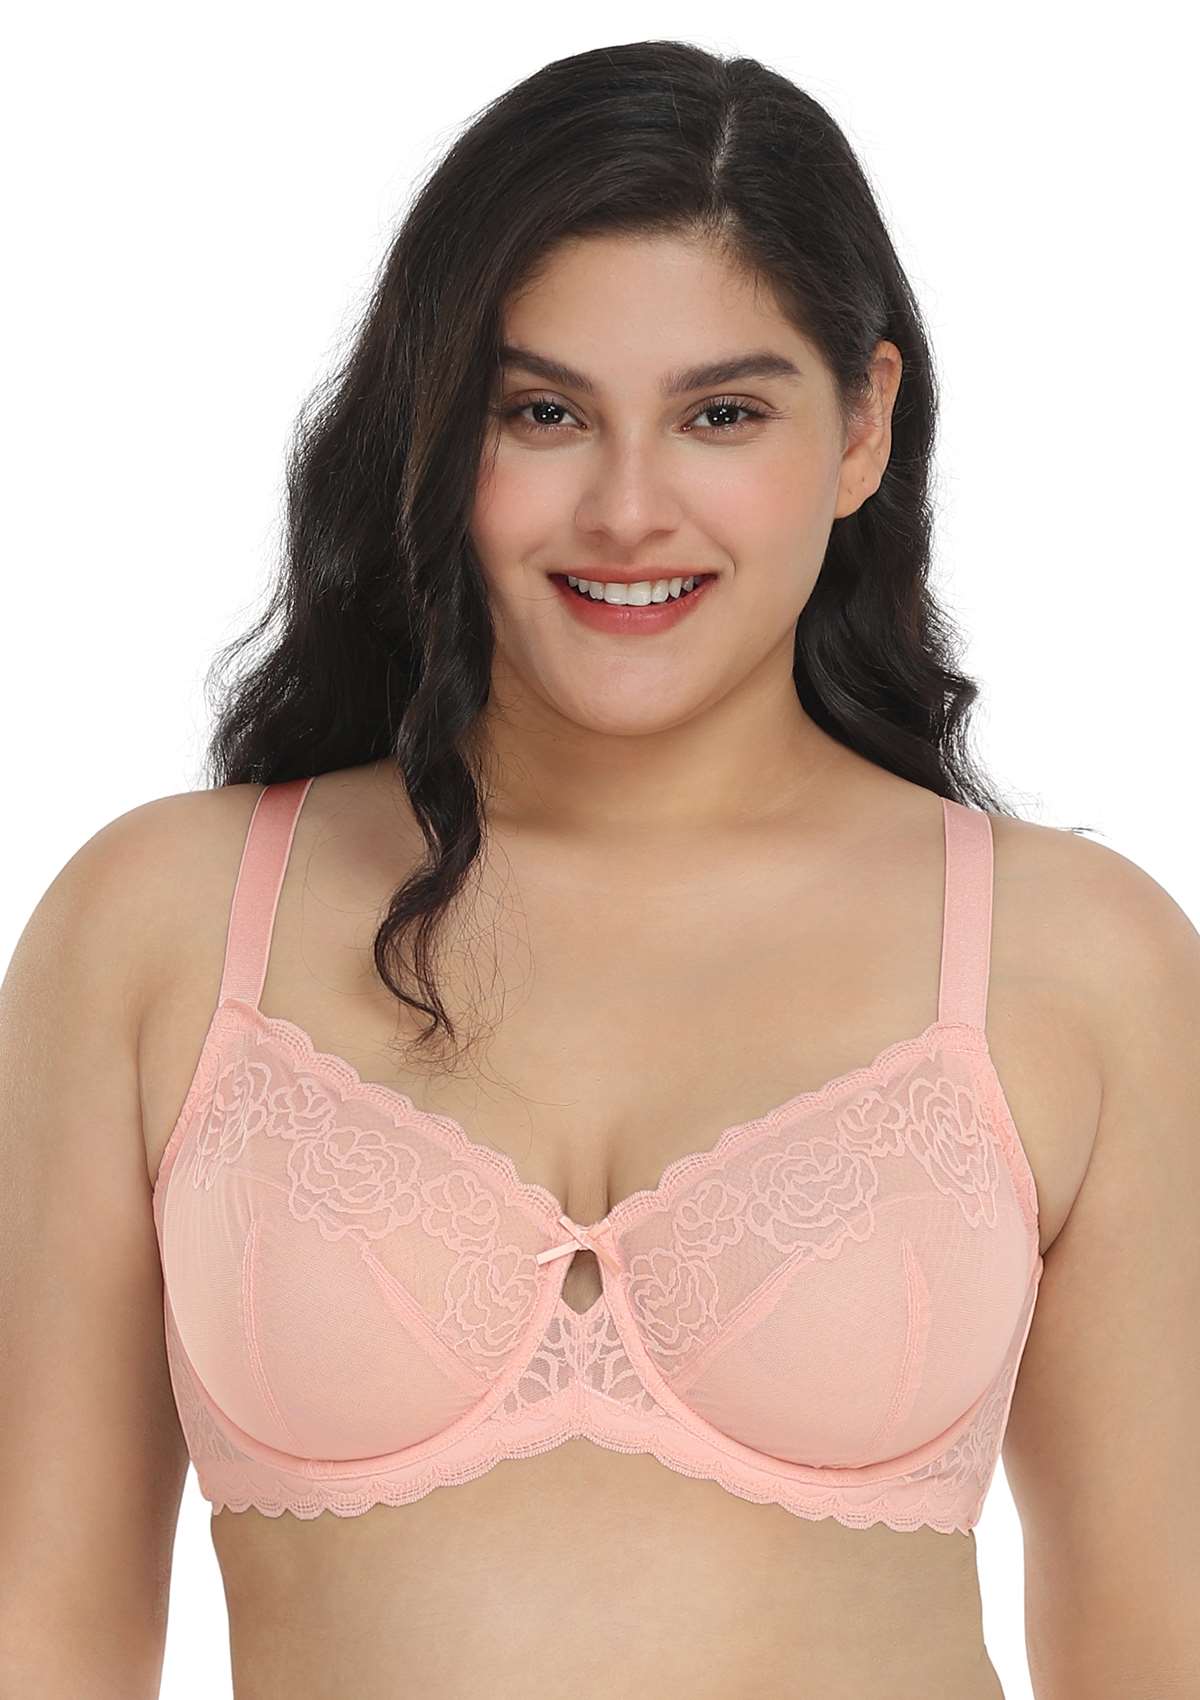 HSIA Rosa Bonica Sheer Lace Mesh Unlined Thin Comfy Woman Bra - Pink / 42 / DDD/F